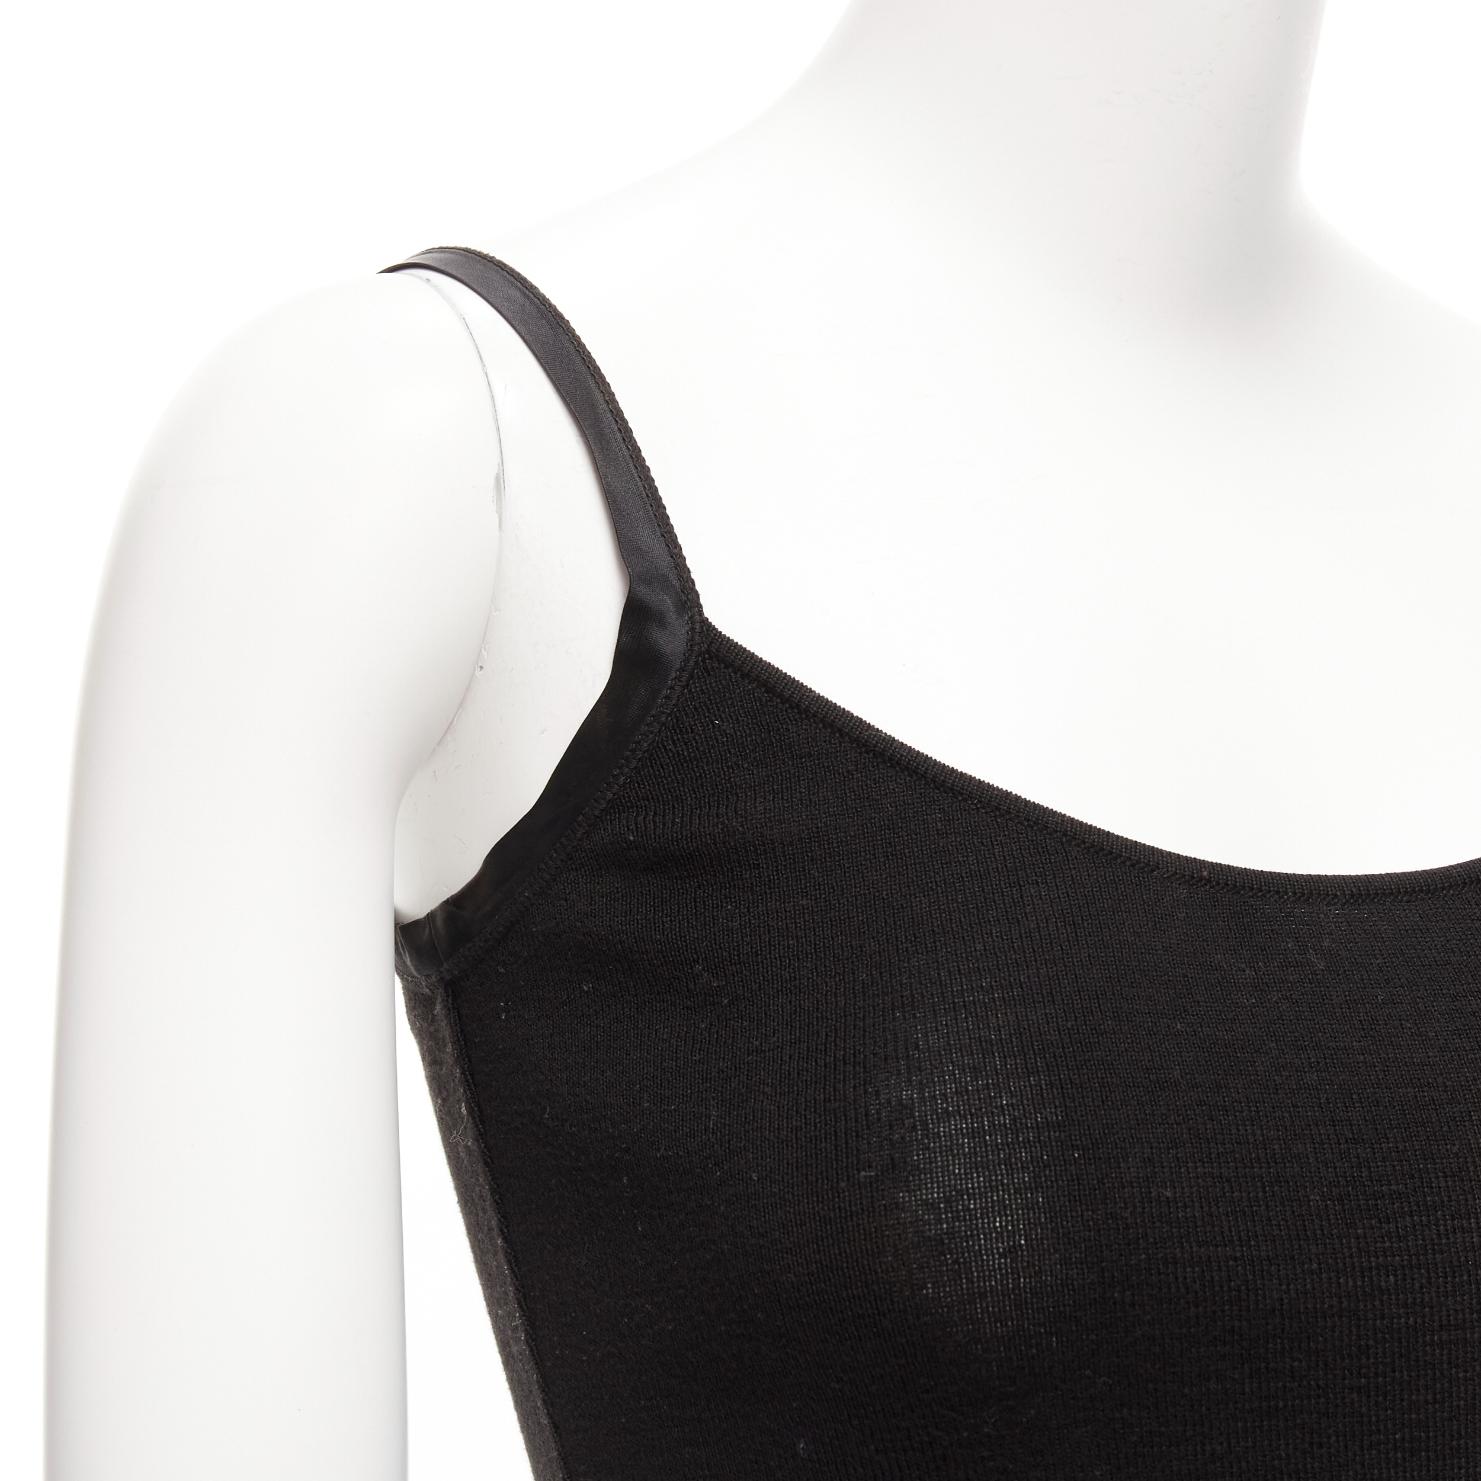 VALENTINO Vintage black cotton satin trim scoop knitted tank top S
Reference: LNKO/A02305
Brand: Valentino
Material: Cotton
Color: Black
Pattern: Solid
Closure: Slip On
Extra Details: Satin trimmed at neck.
Made in: Italy

CONDITION:
Condition: